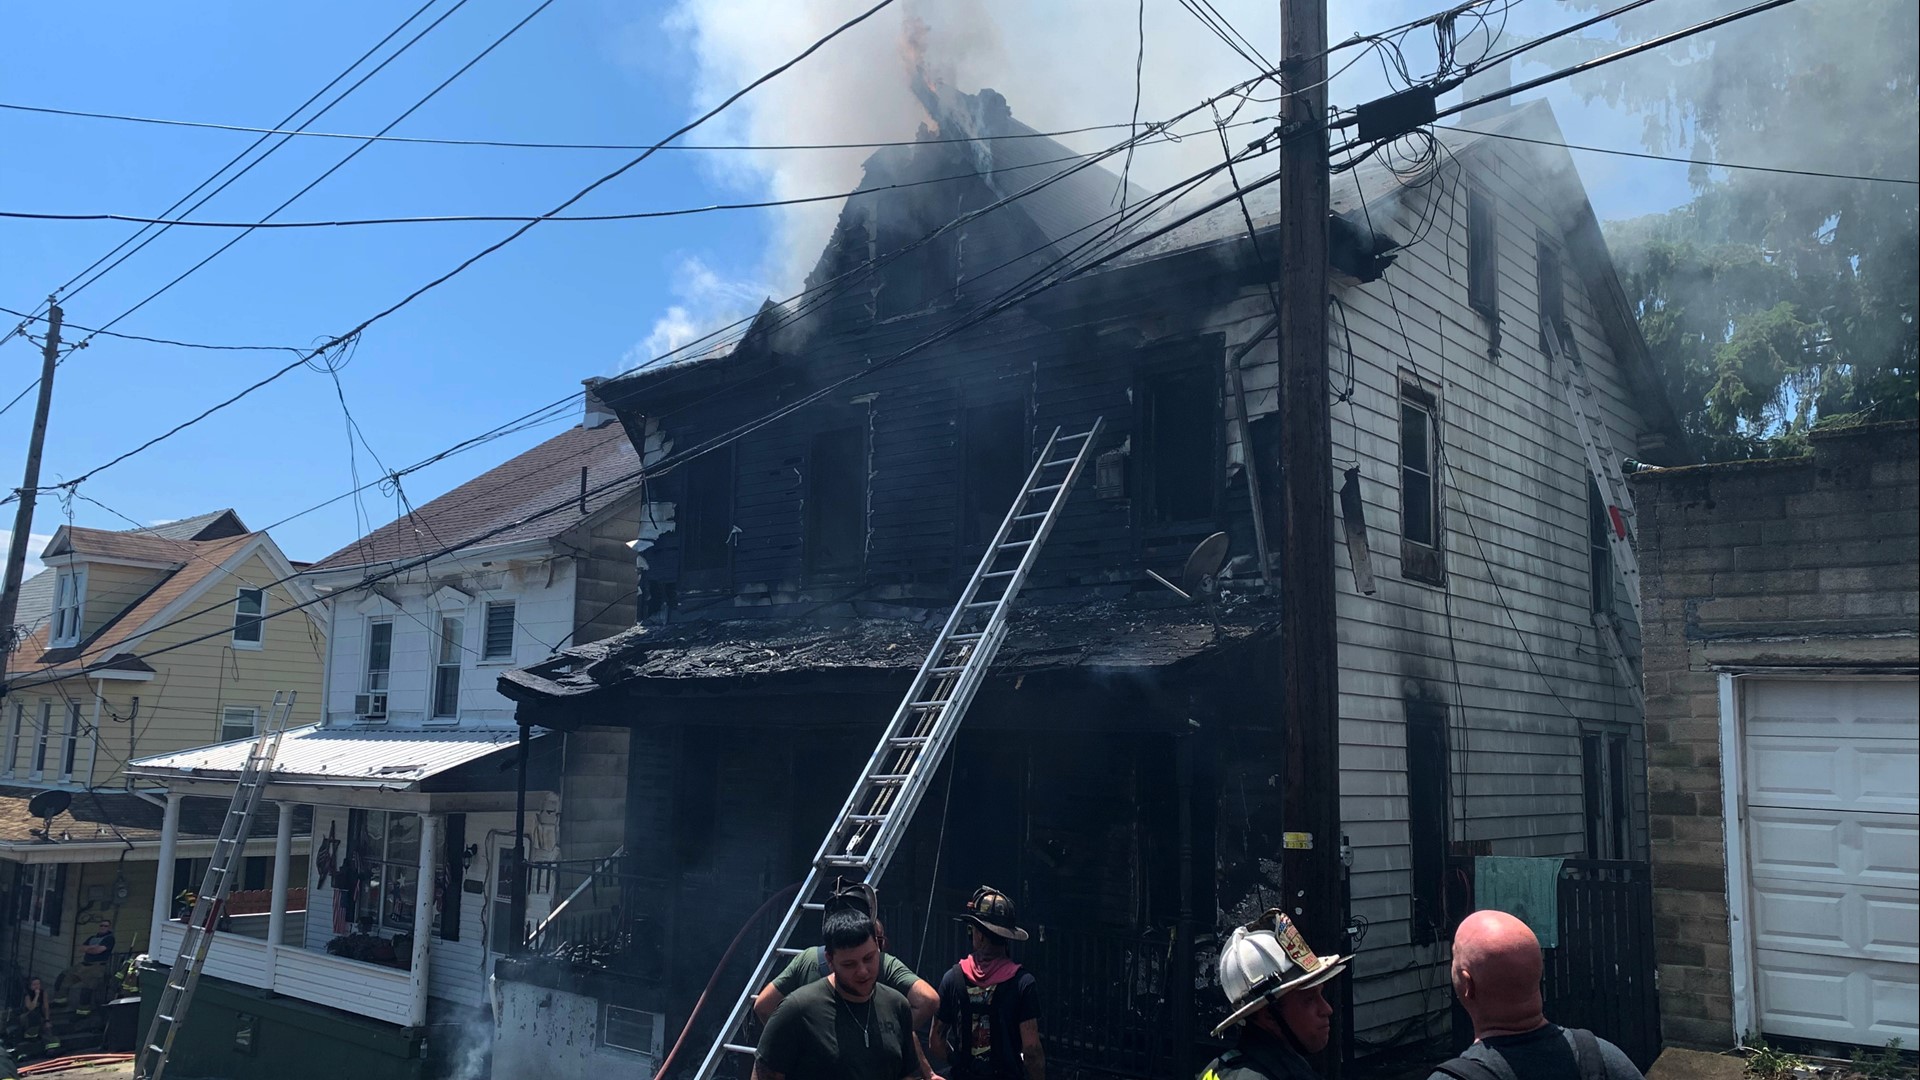 The fire broke out around 12:30 p.m. in the double-block home on North Shamokin Street.